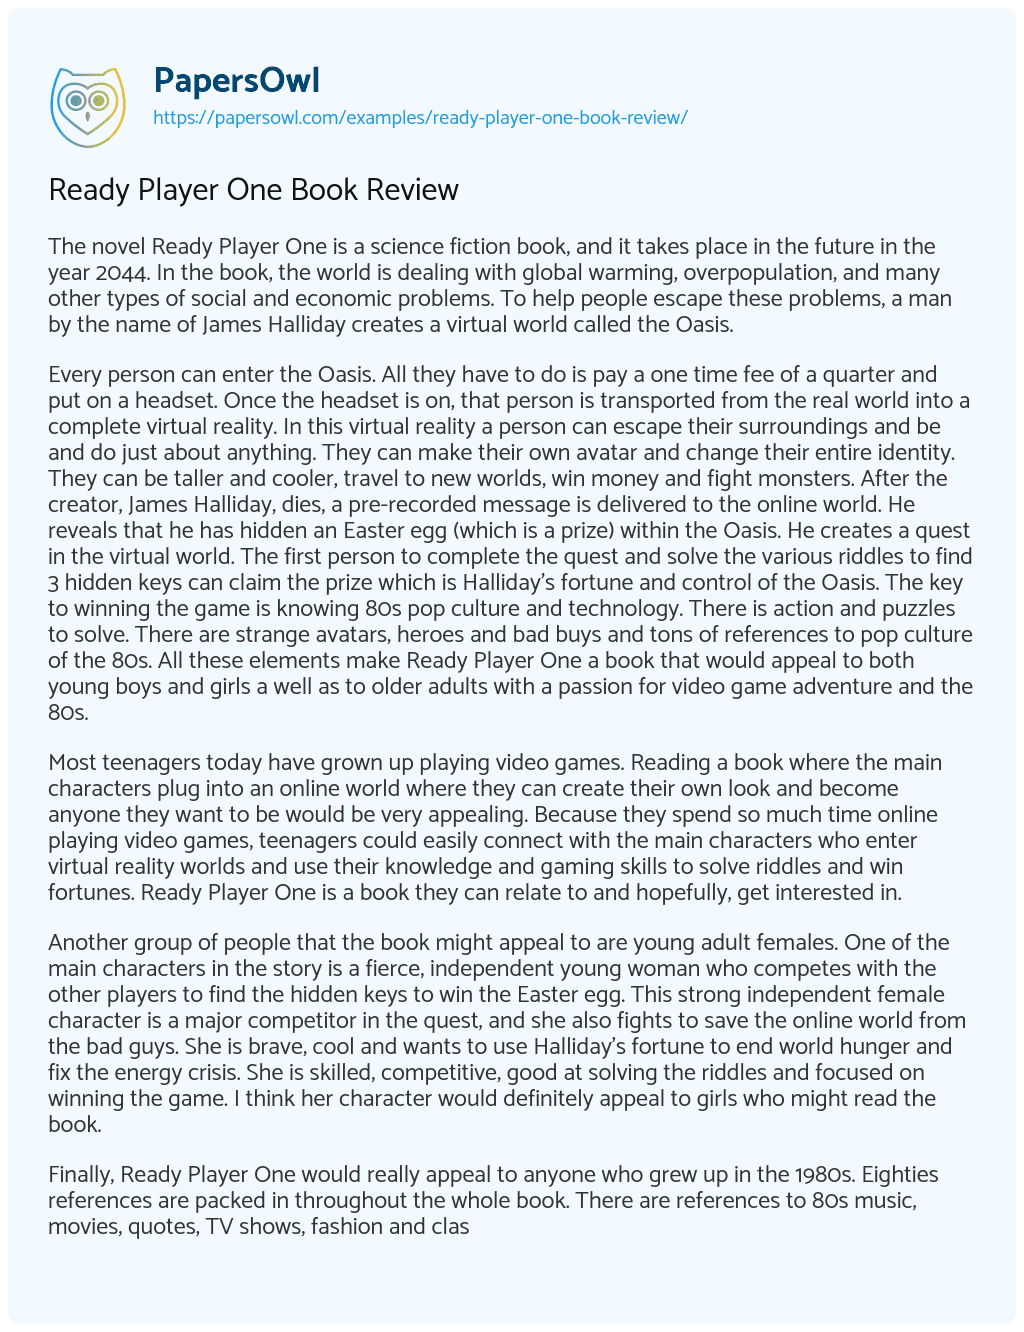 essay topics for ready player one